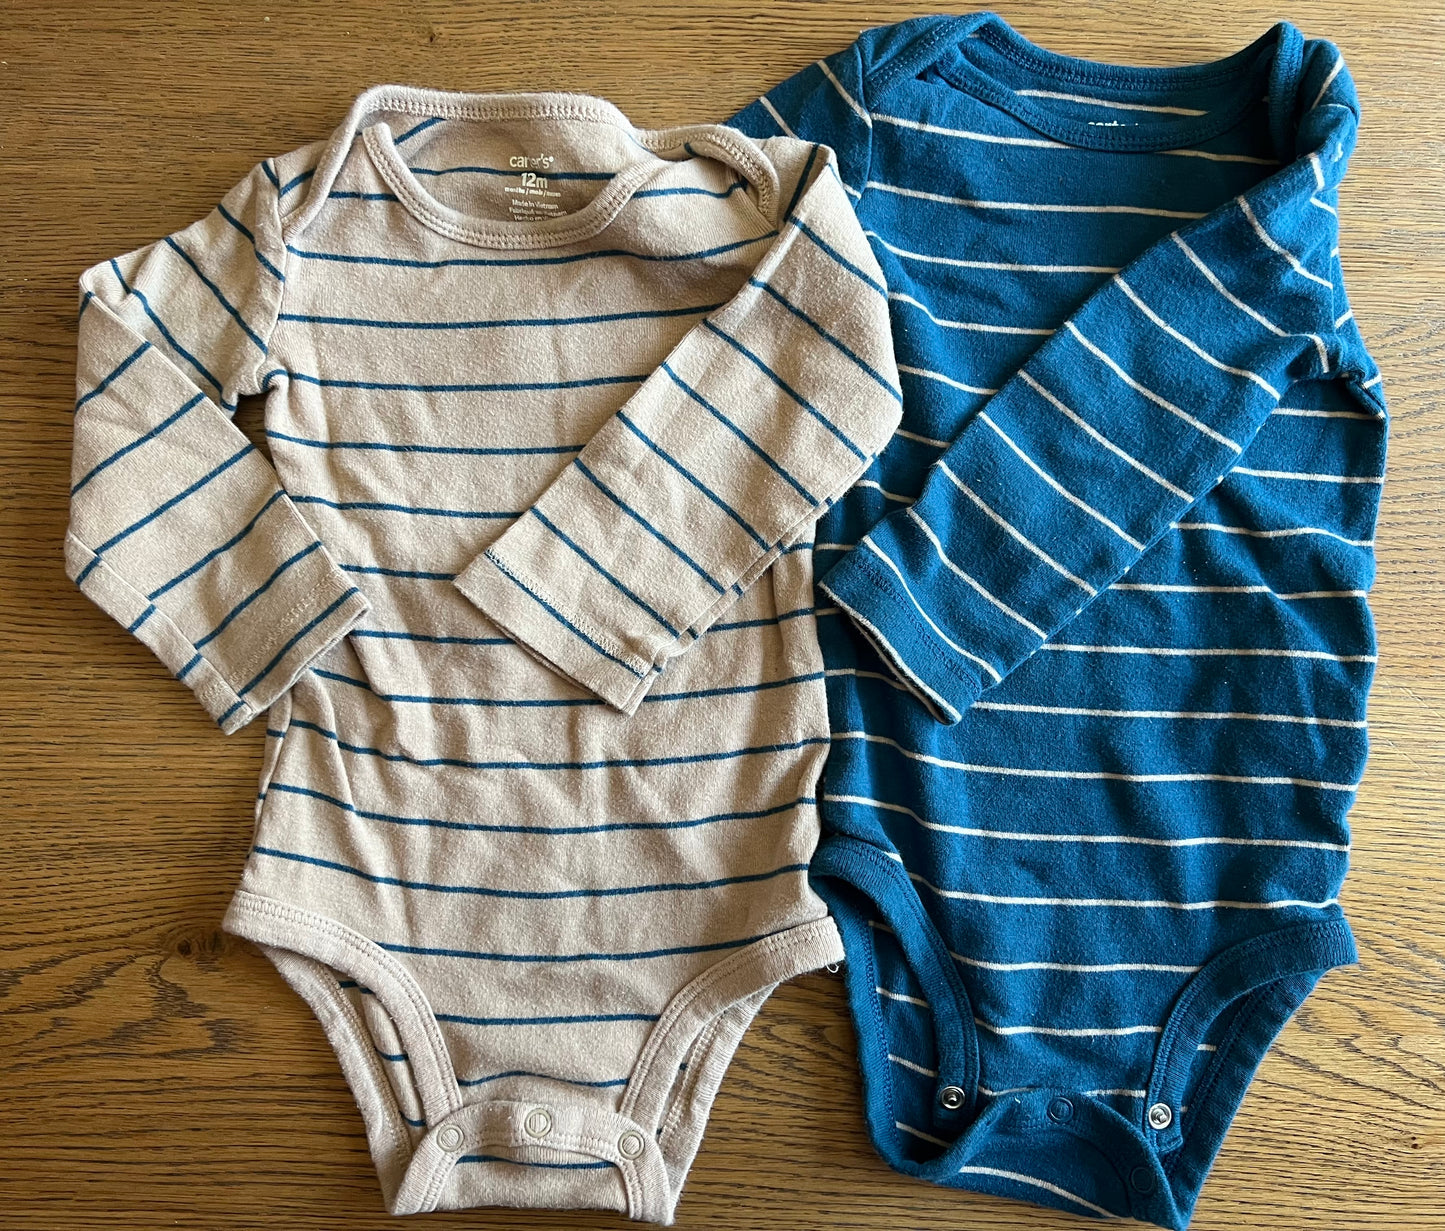 Carter’s 12 months striped long sleeve onesies